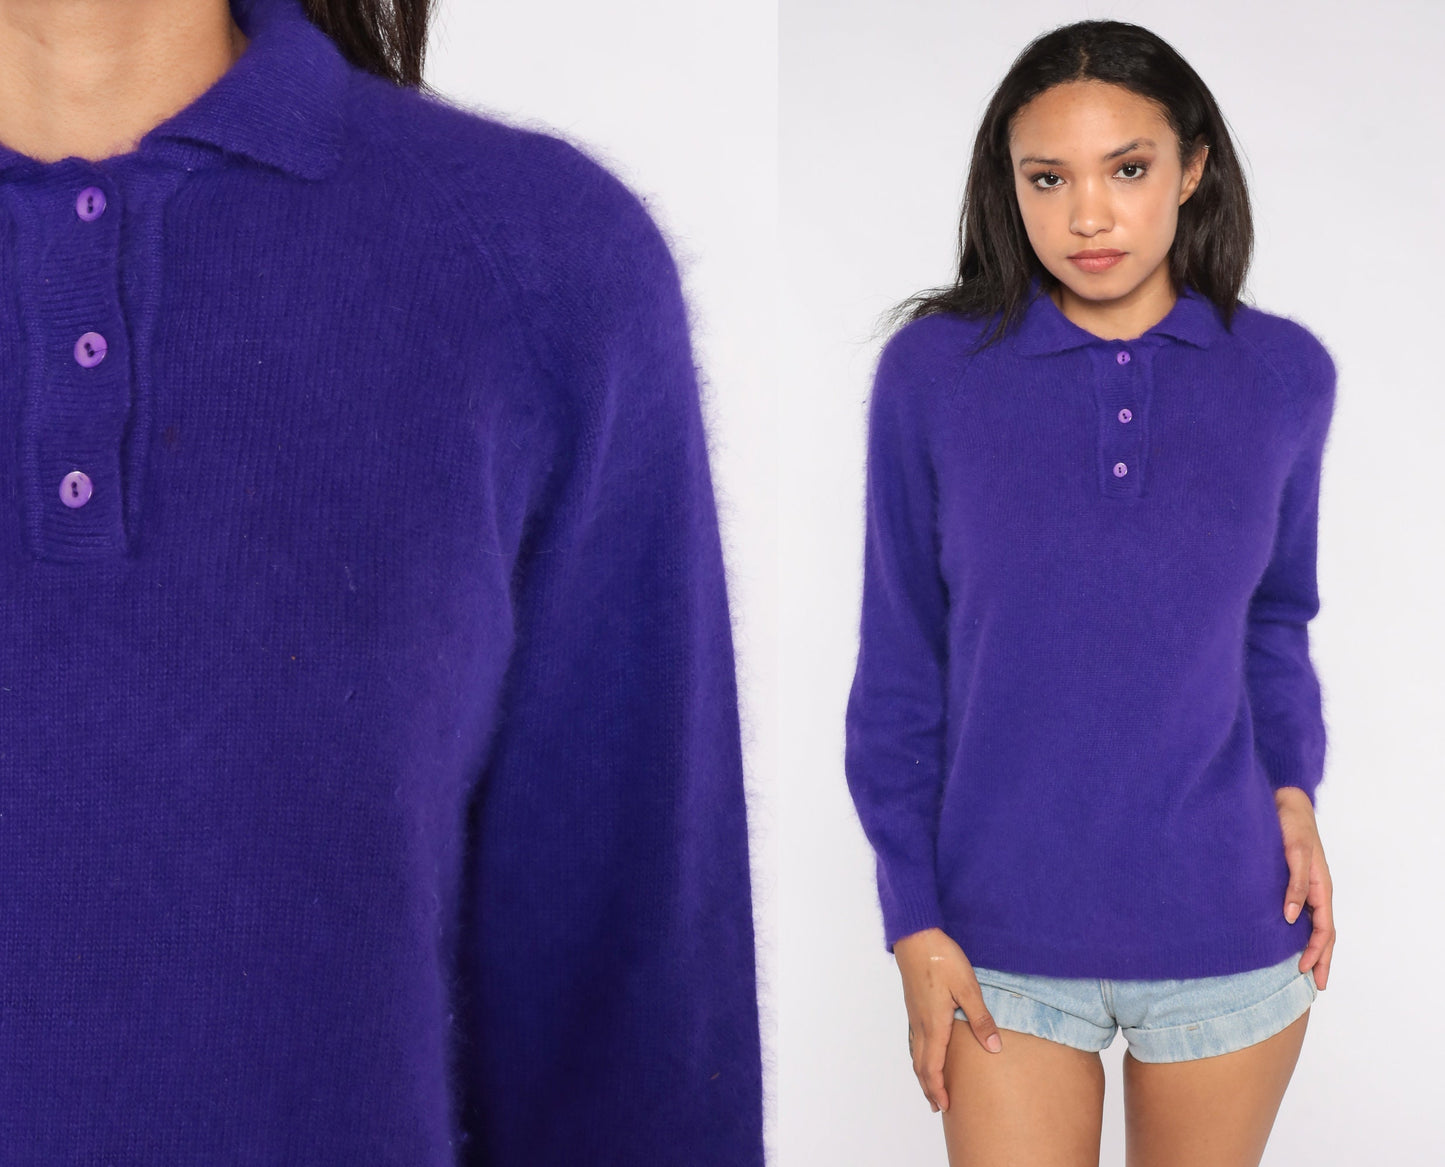 Purple Collared Sweater 80s Knit Sweater Angora Blend Fuzzy Soft Pullover Button Up Polo Sweater Henley 1980s Vintage Knitwear Large L